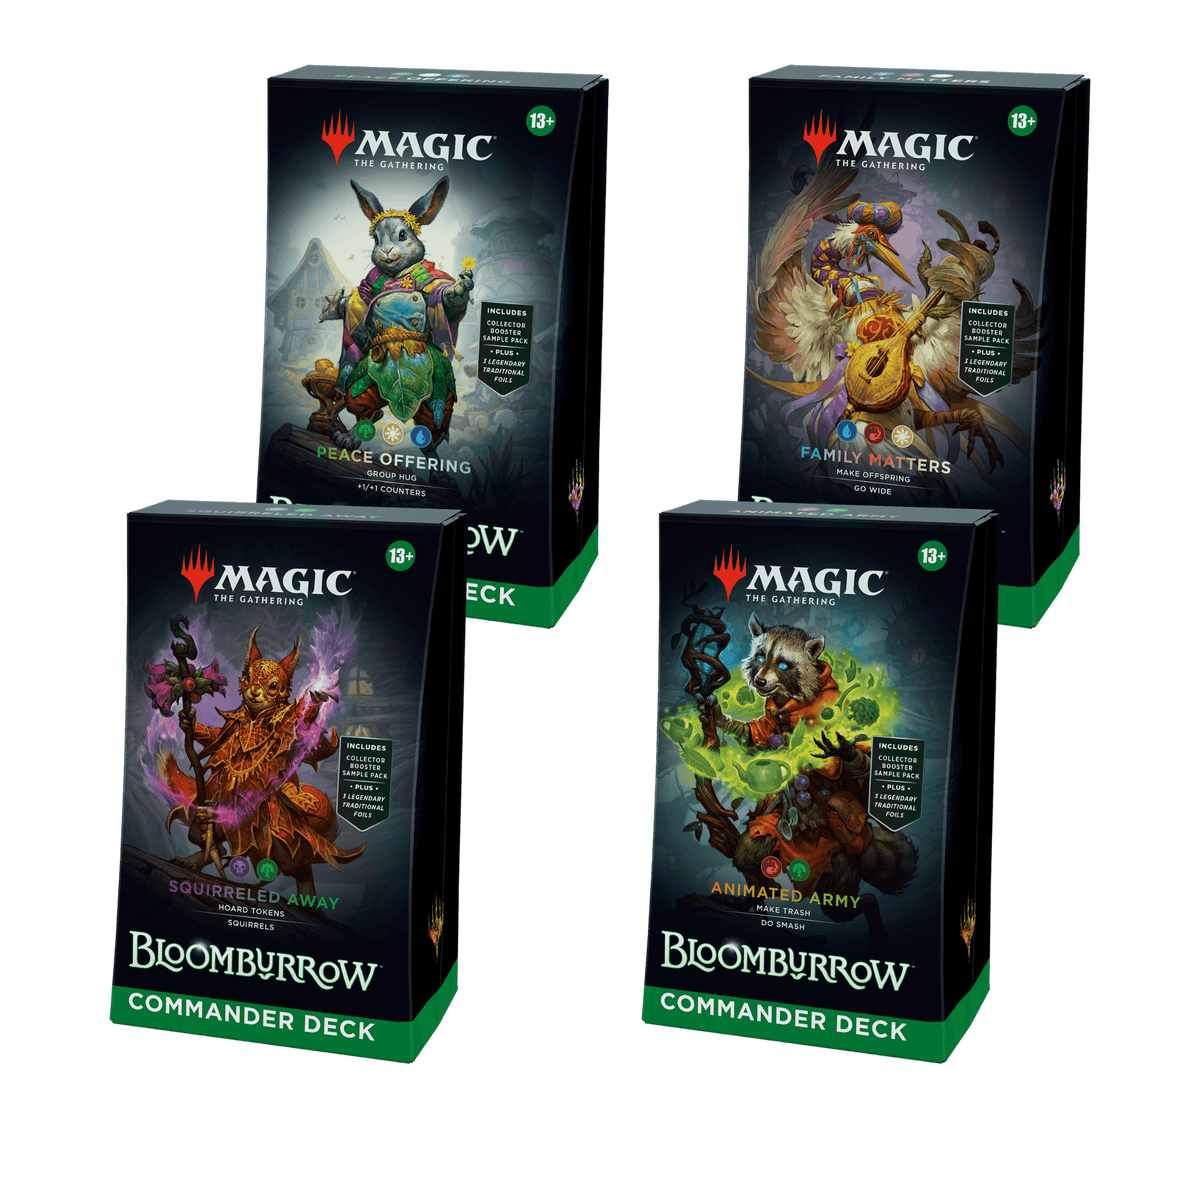 Magic: The Gathering Bloomburrow Commander Deck Display (Preorder)